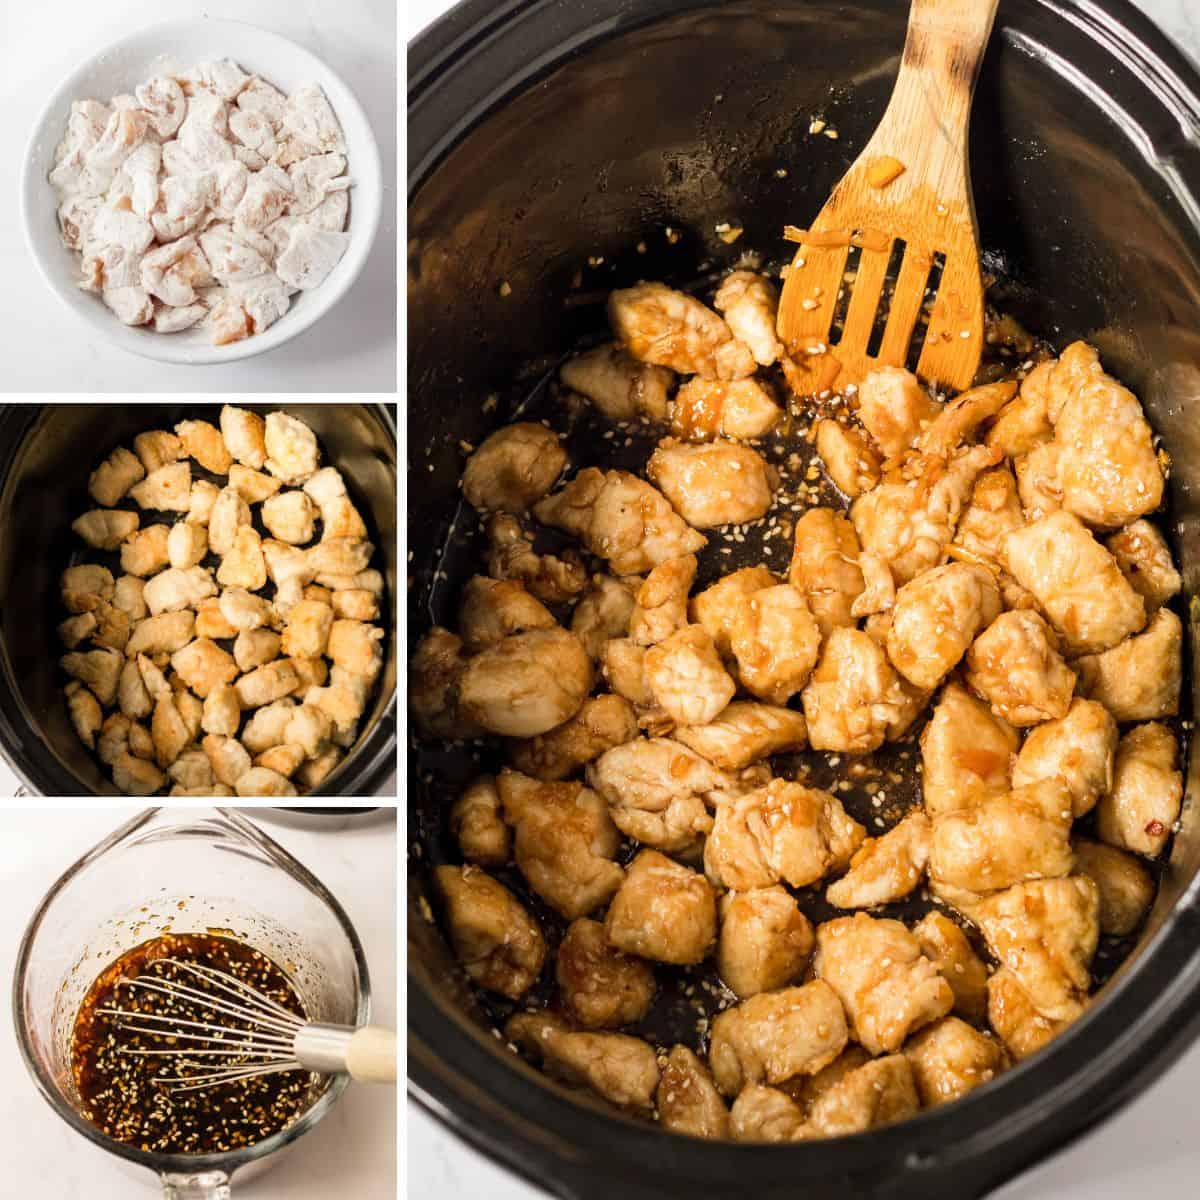 Four image collage of steps to making orange chicken in the crockpot. 1: toss chicken pieces in cornstarch. 2: brown chicken and place in slow cooker. 3: Whisk sauce ingredients together in bowl. 4: Add sauce to slow cooker and toss to coat.